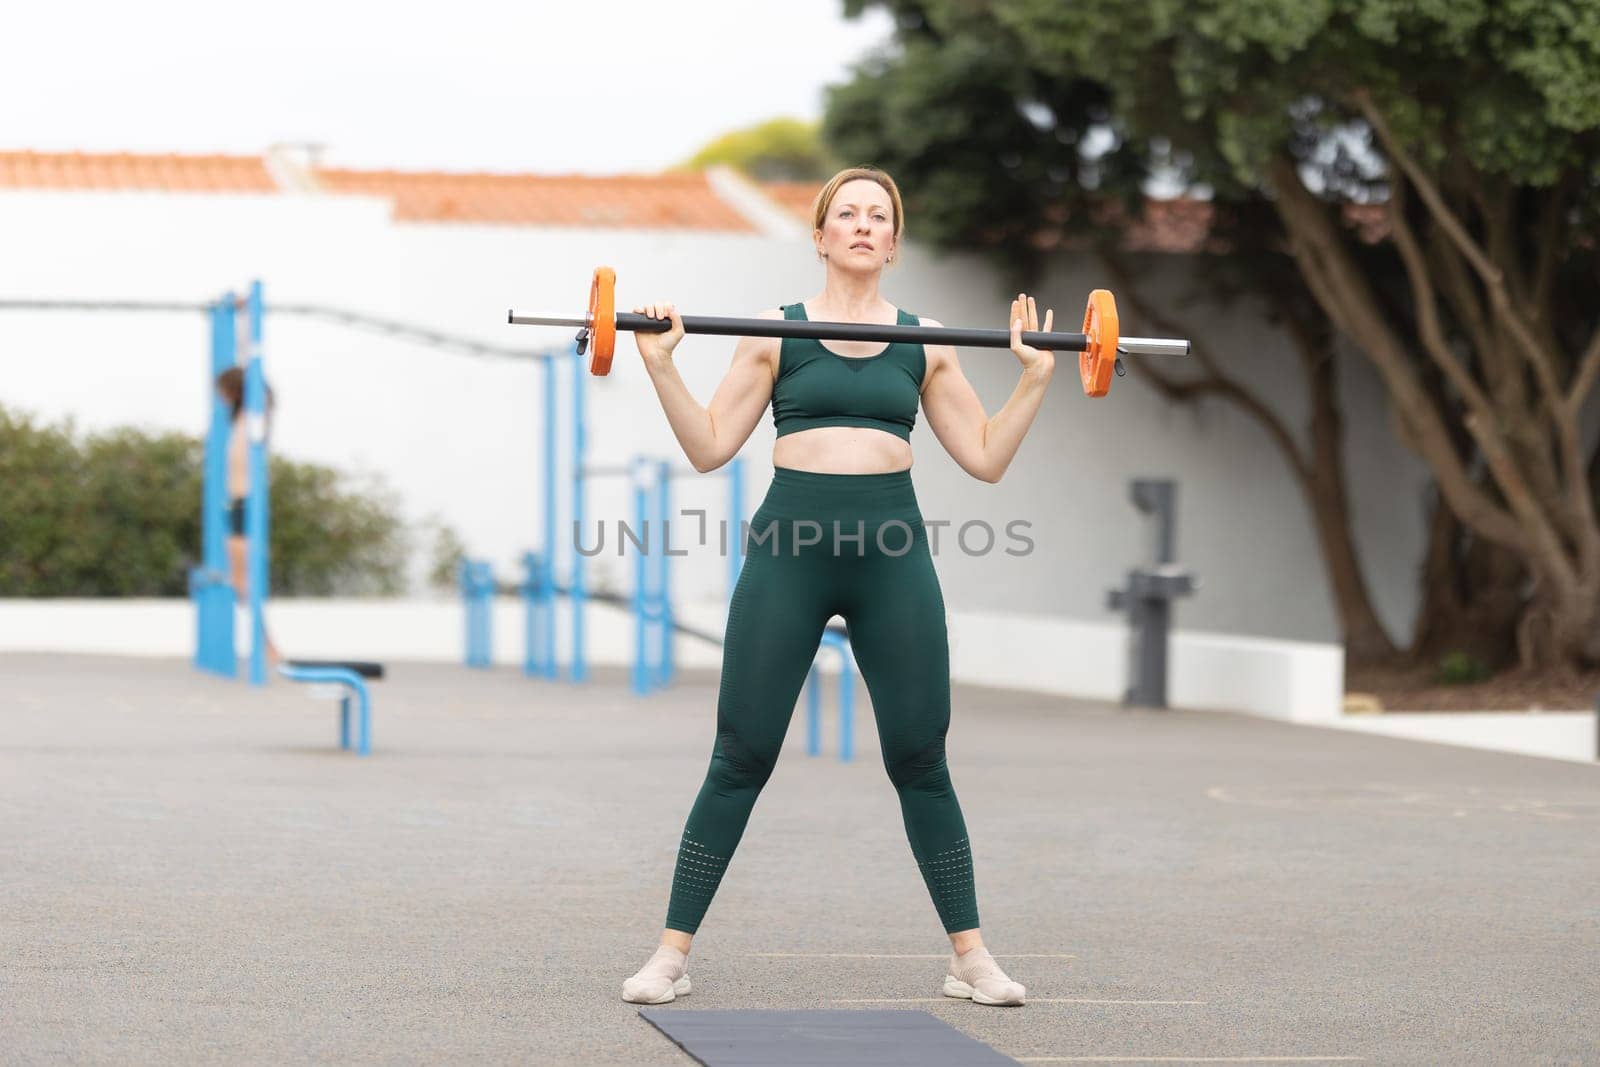 Adult sportive woman lifting a dumbbell on the sports ground. Mid shot